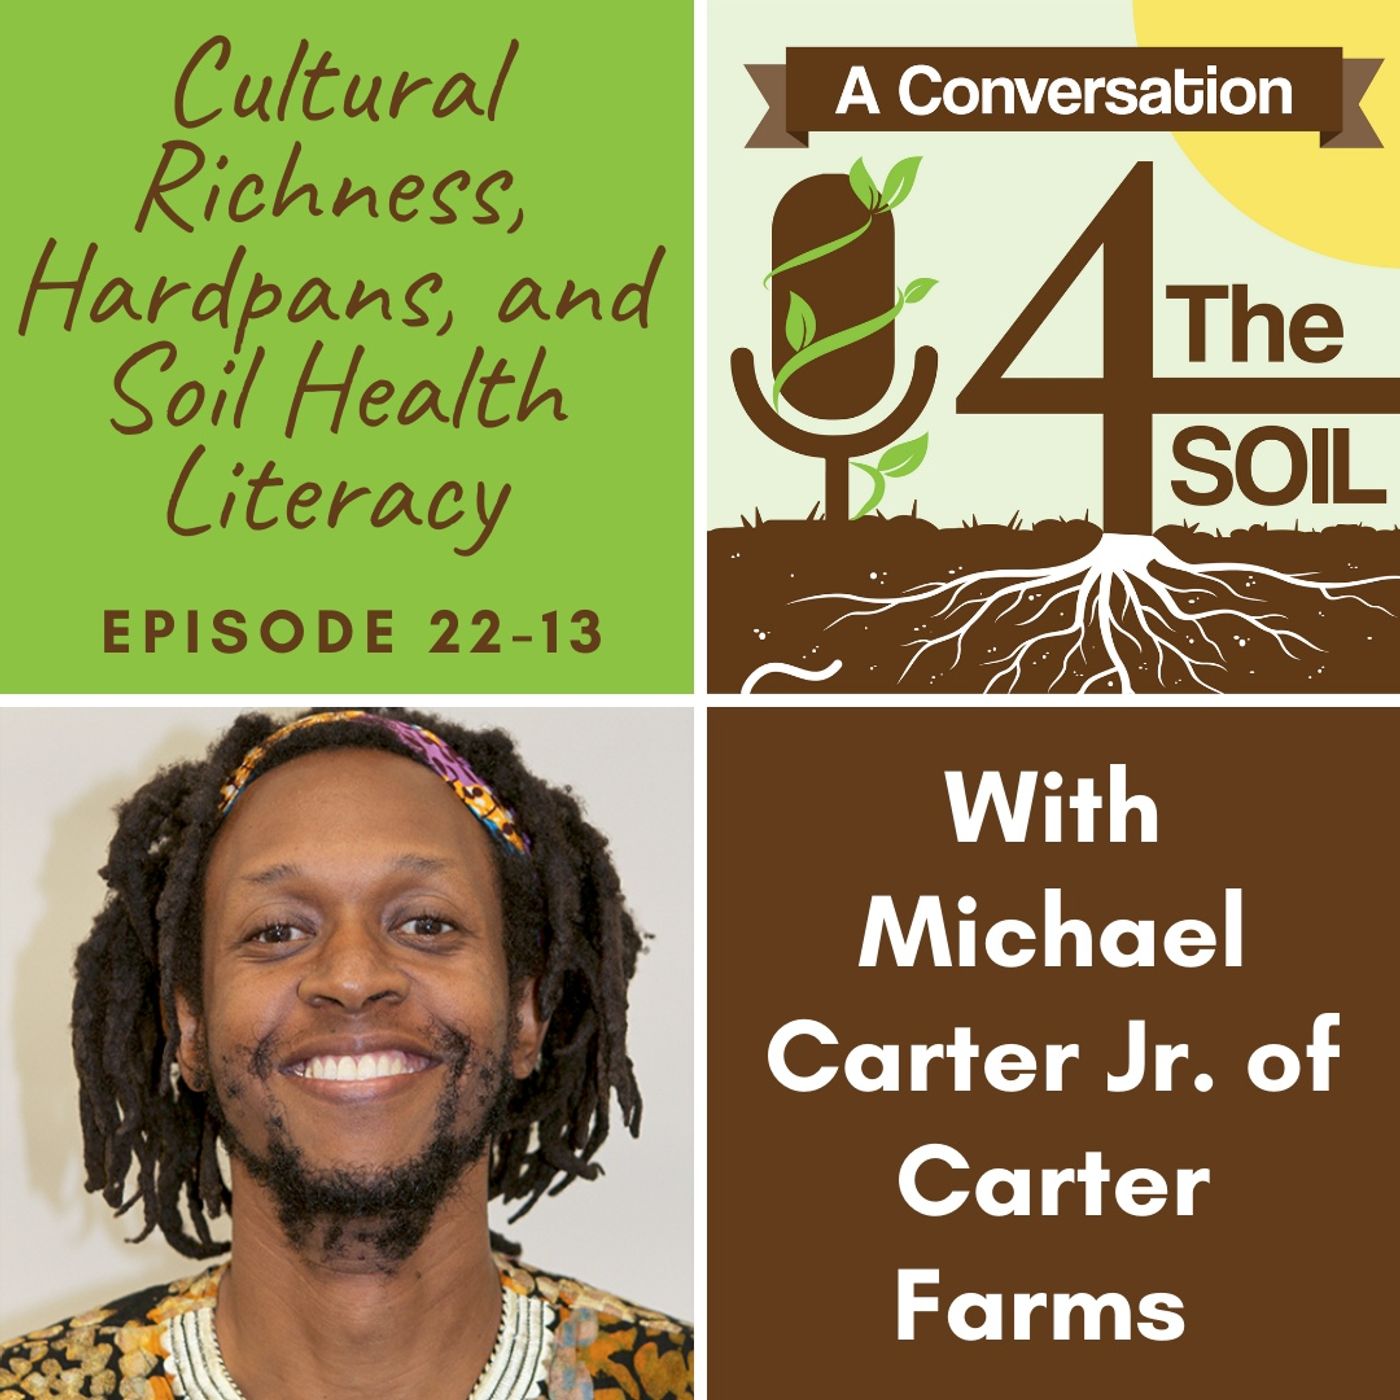 Episode 22 - 13: Cultural Richness, Hardpans, and Soil Health Literacy with Michael Carter Jr. of Carter Farms (Part I)